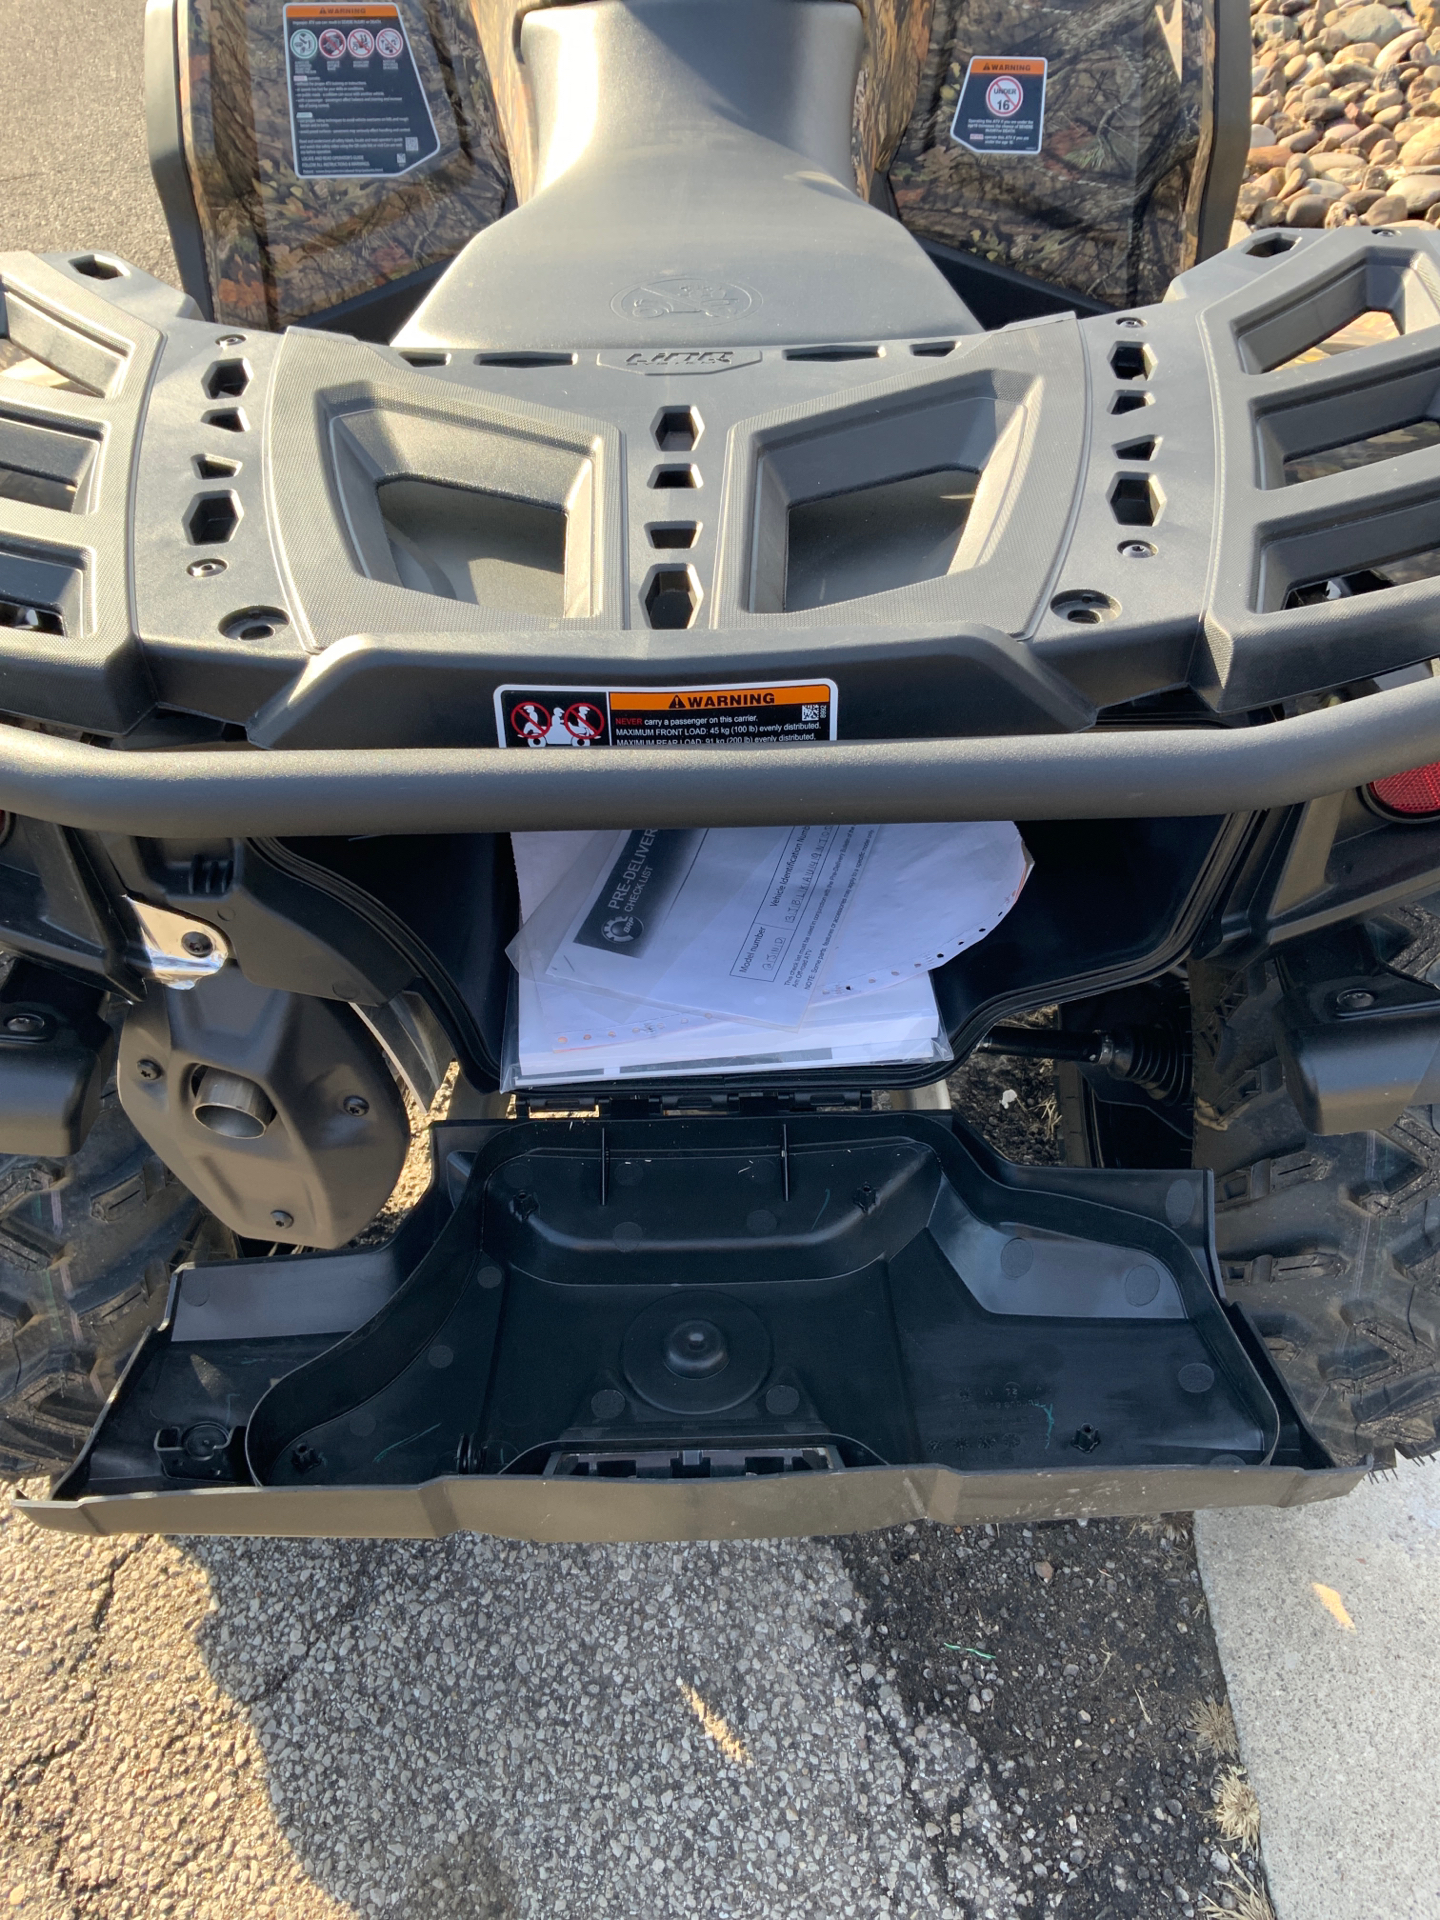 2022 Can-Am Outlander XT 850 in Barboursville, West Virginia - Photo 11